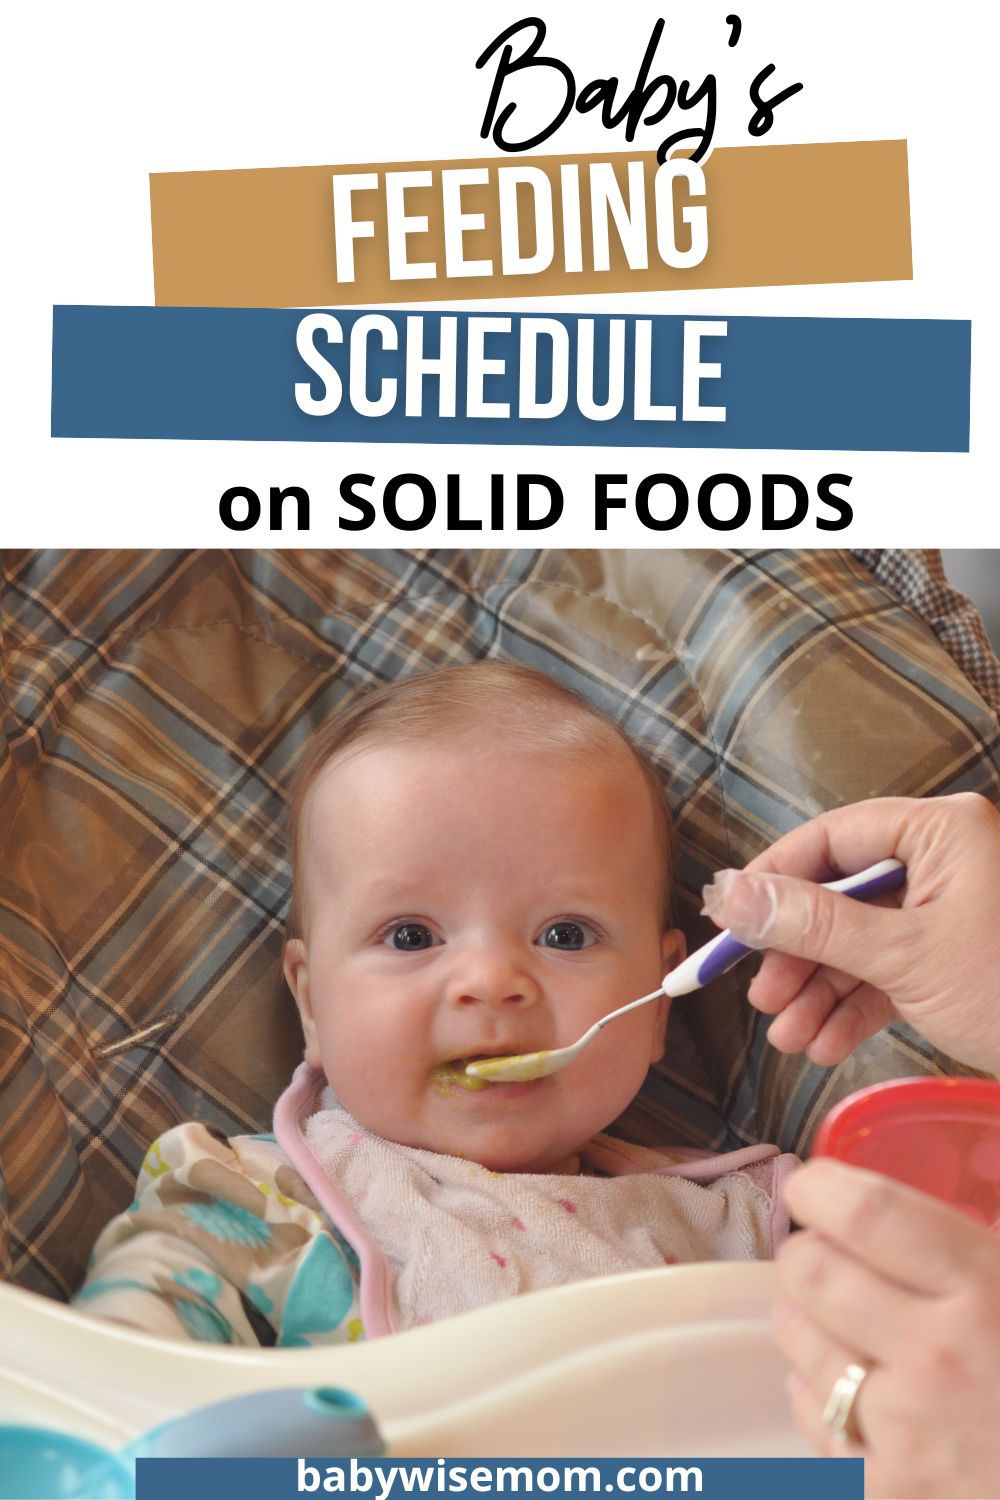 Baby's feeding schedule on solid foods